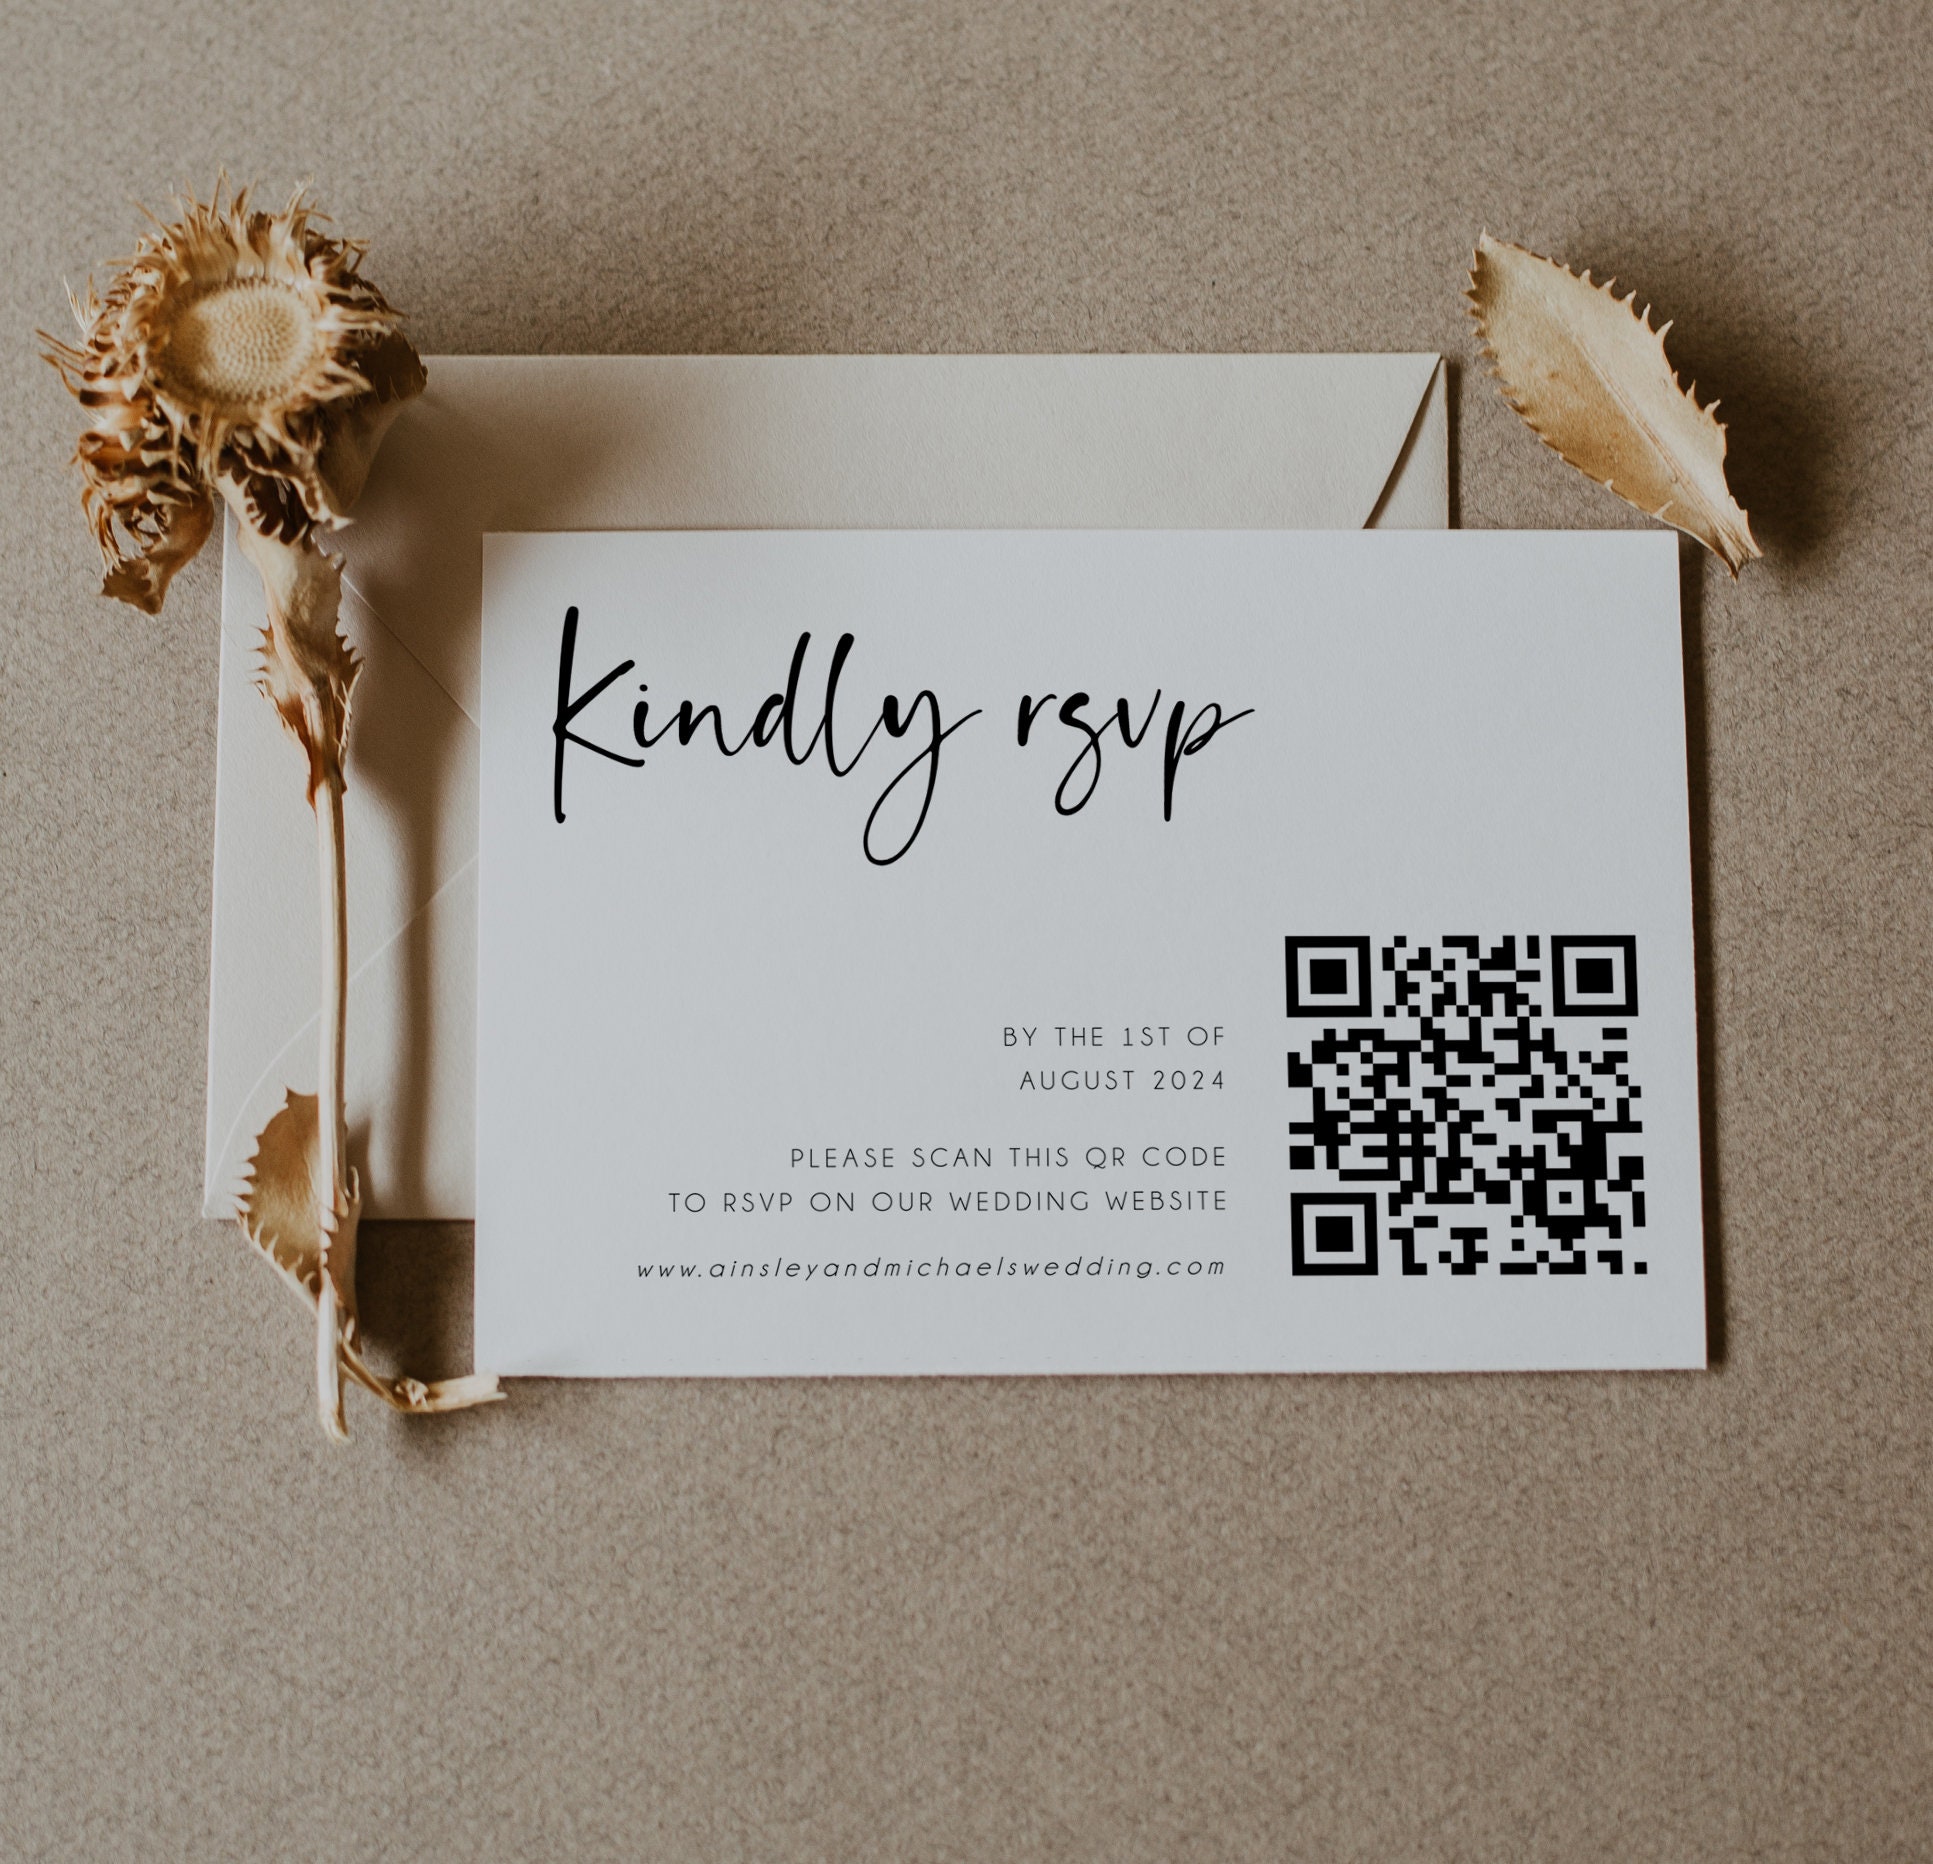 How to Use QR Codes for Your Event Tickets and RSVPs